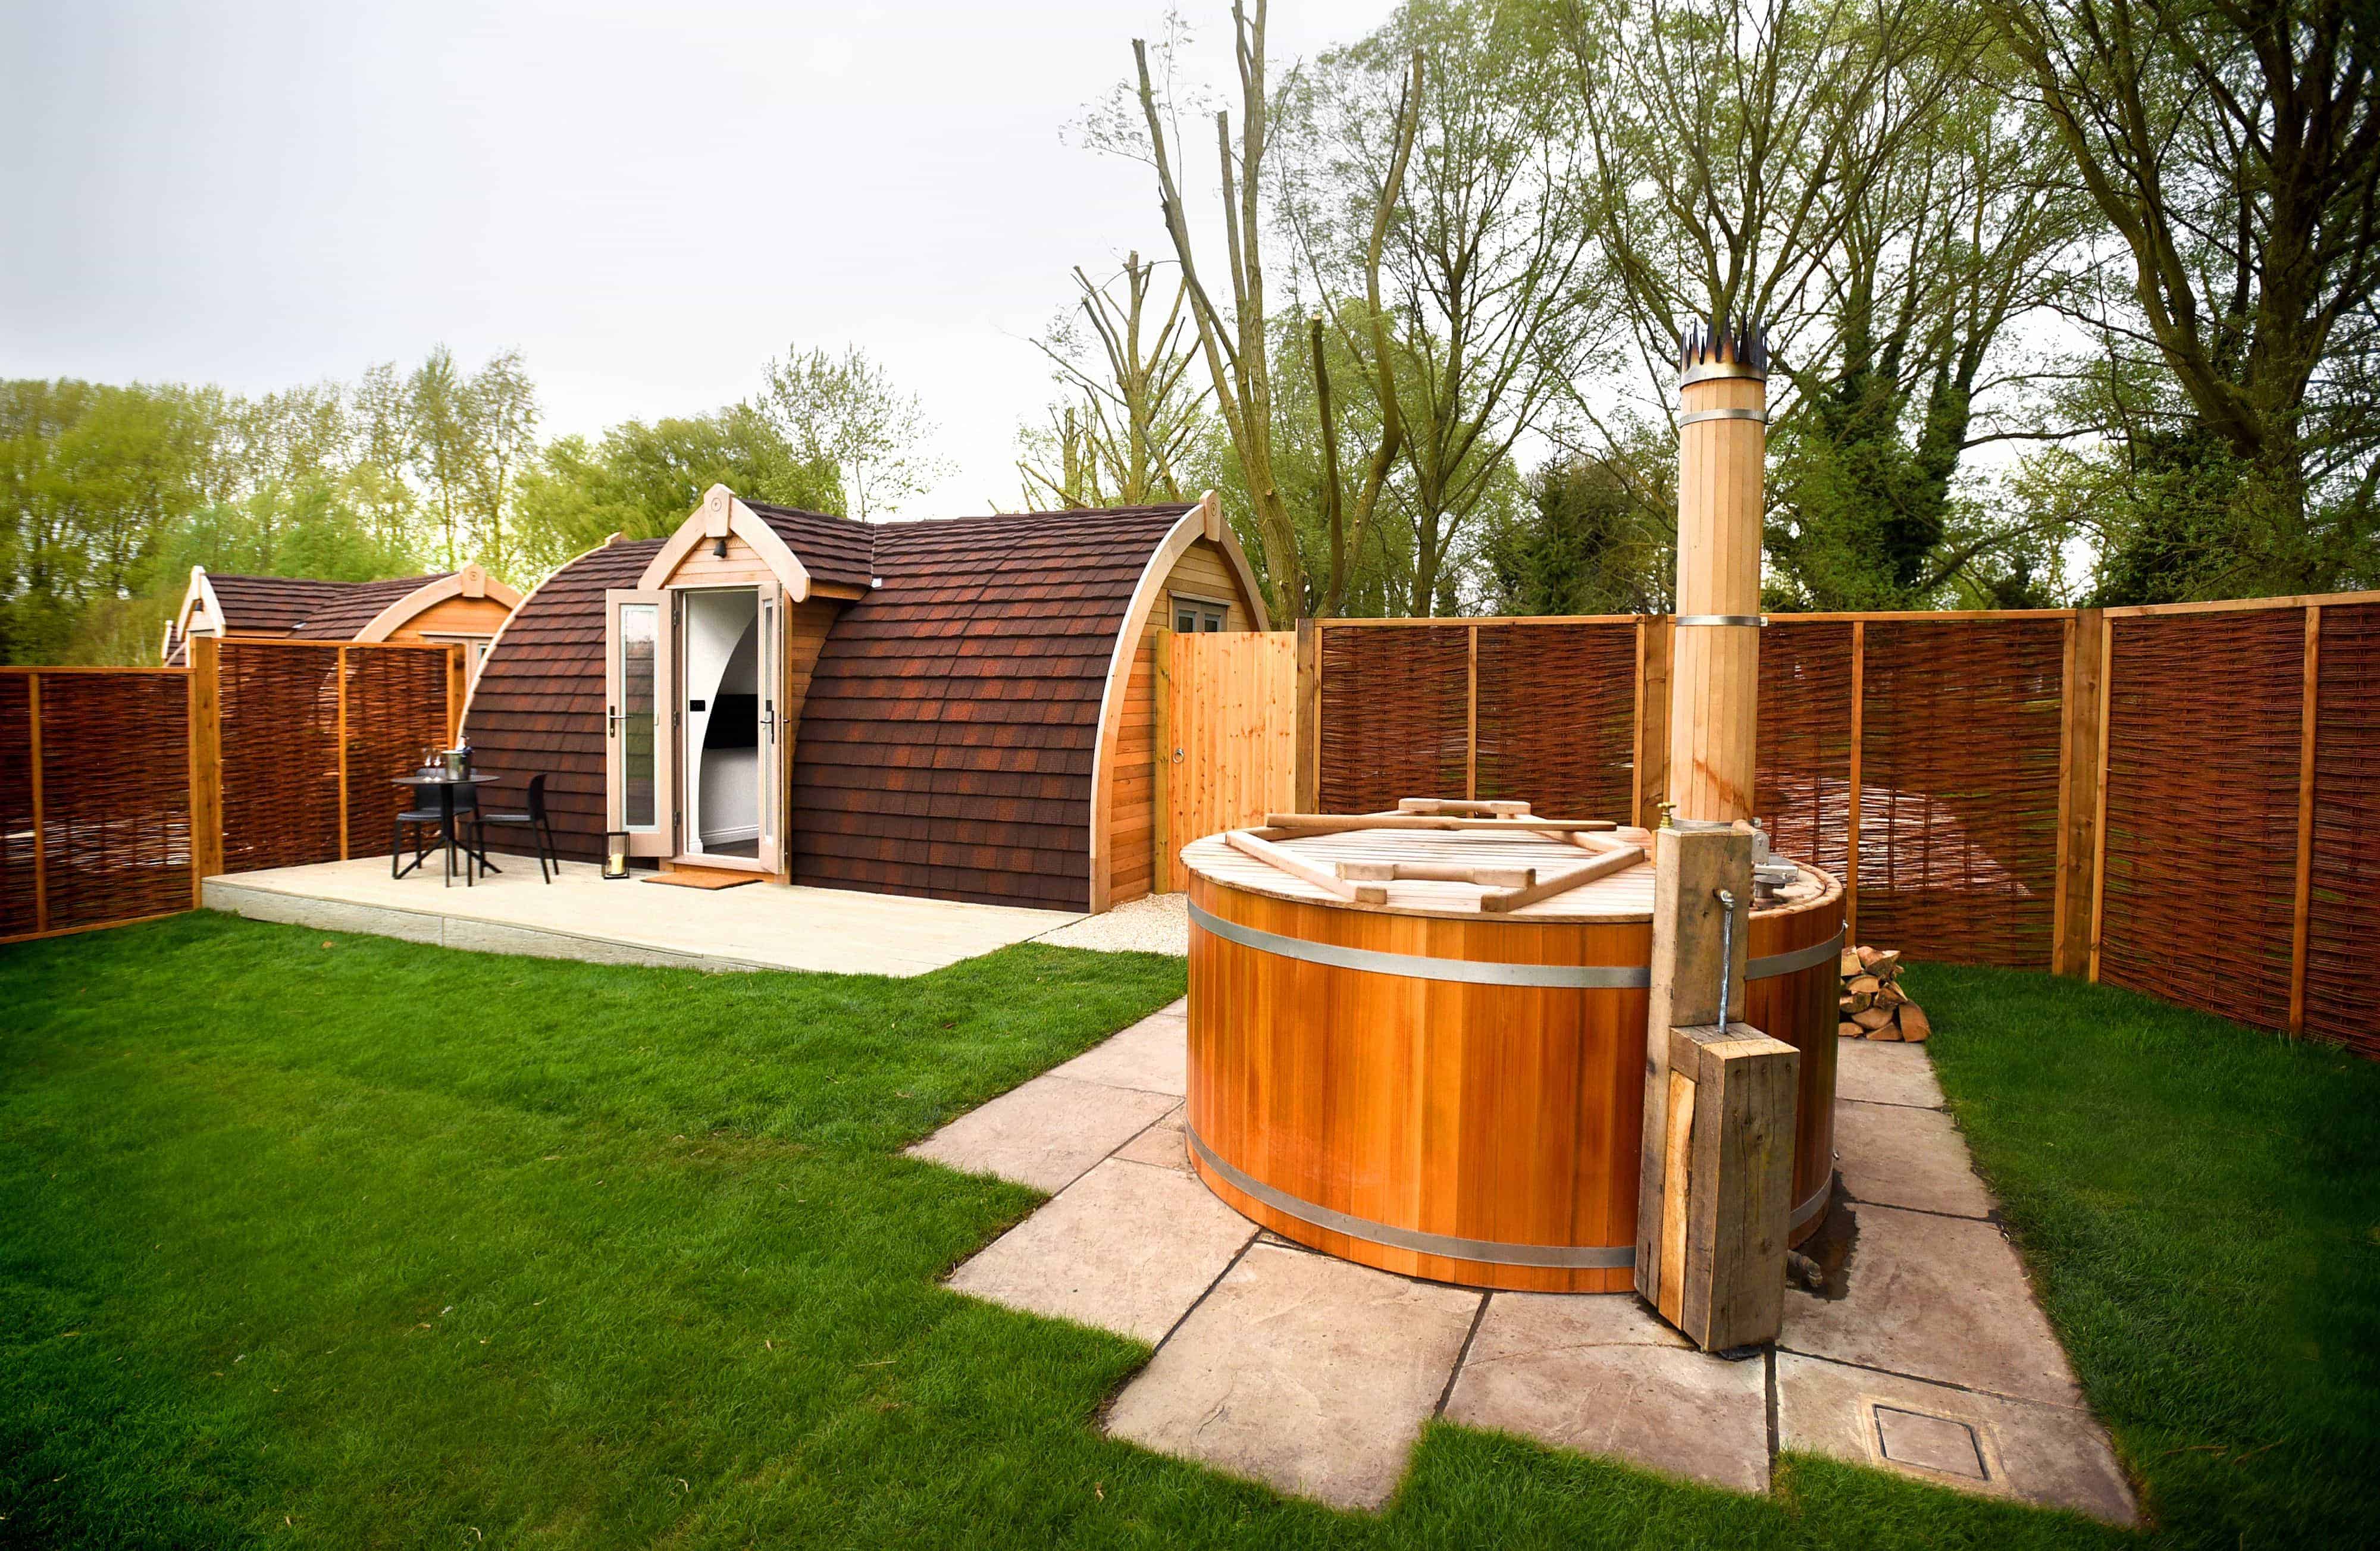 The 18th-century Tuddenham Mill has 21 rooms, including two hobbit-style huts with a hot tub